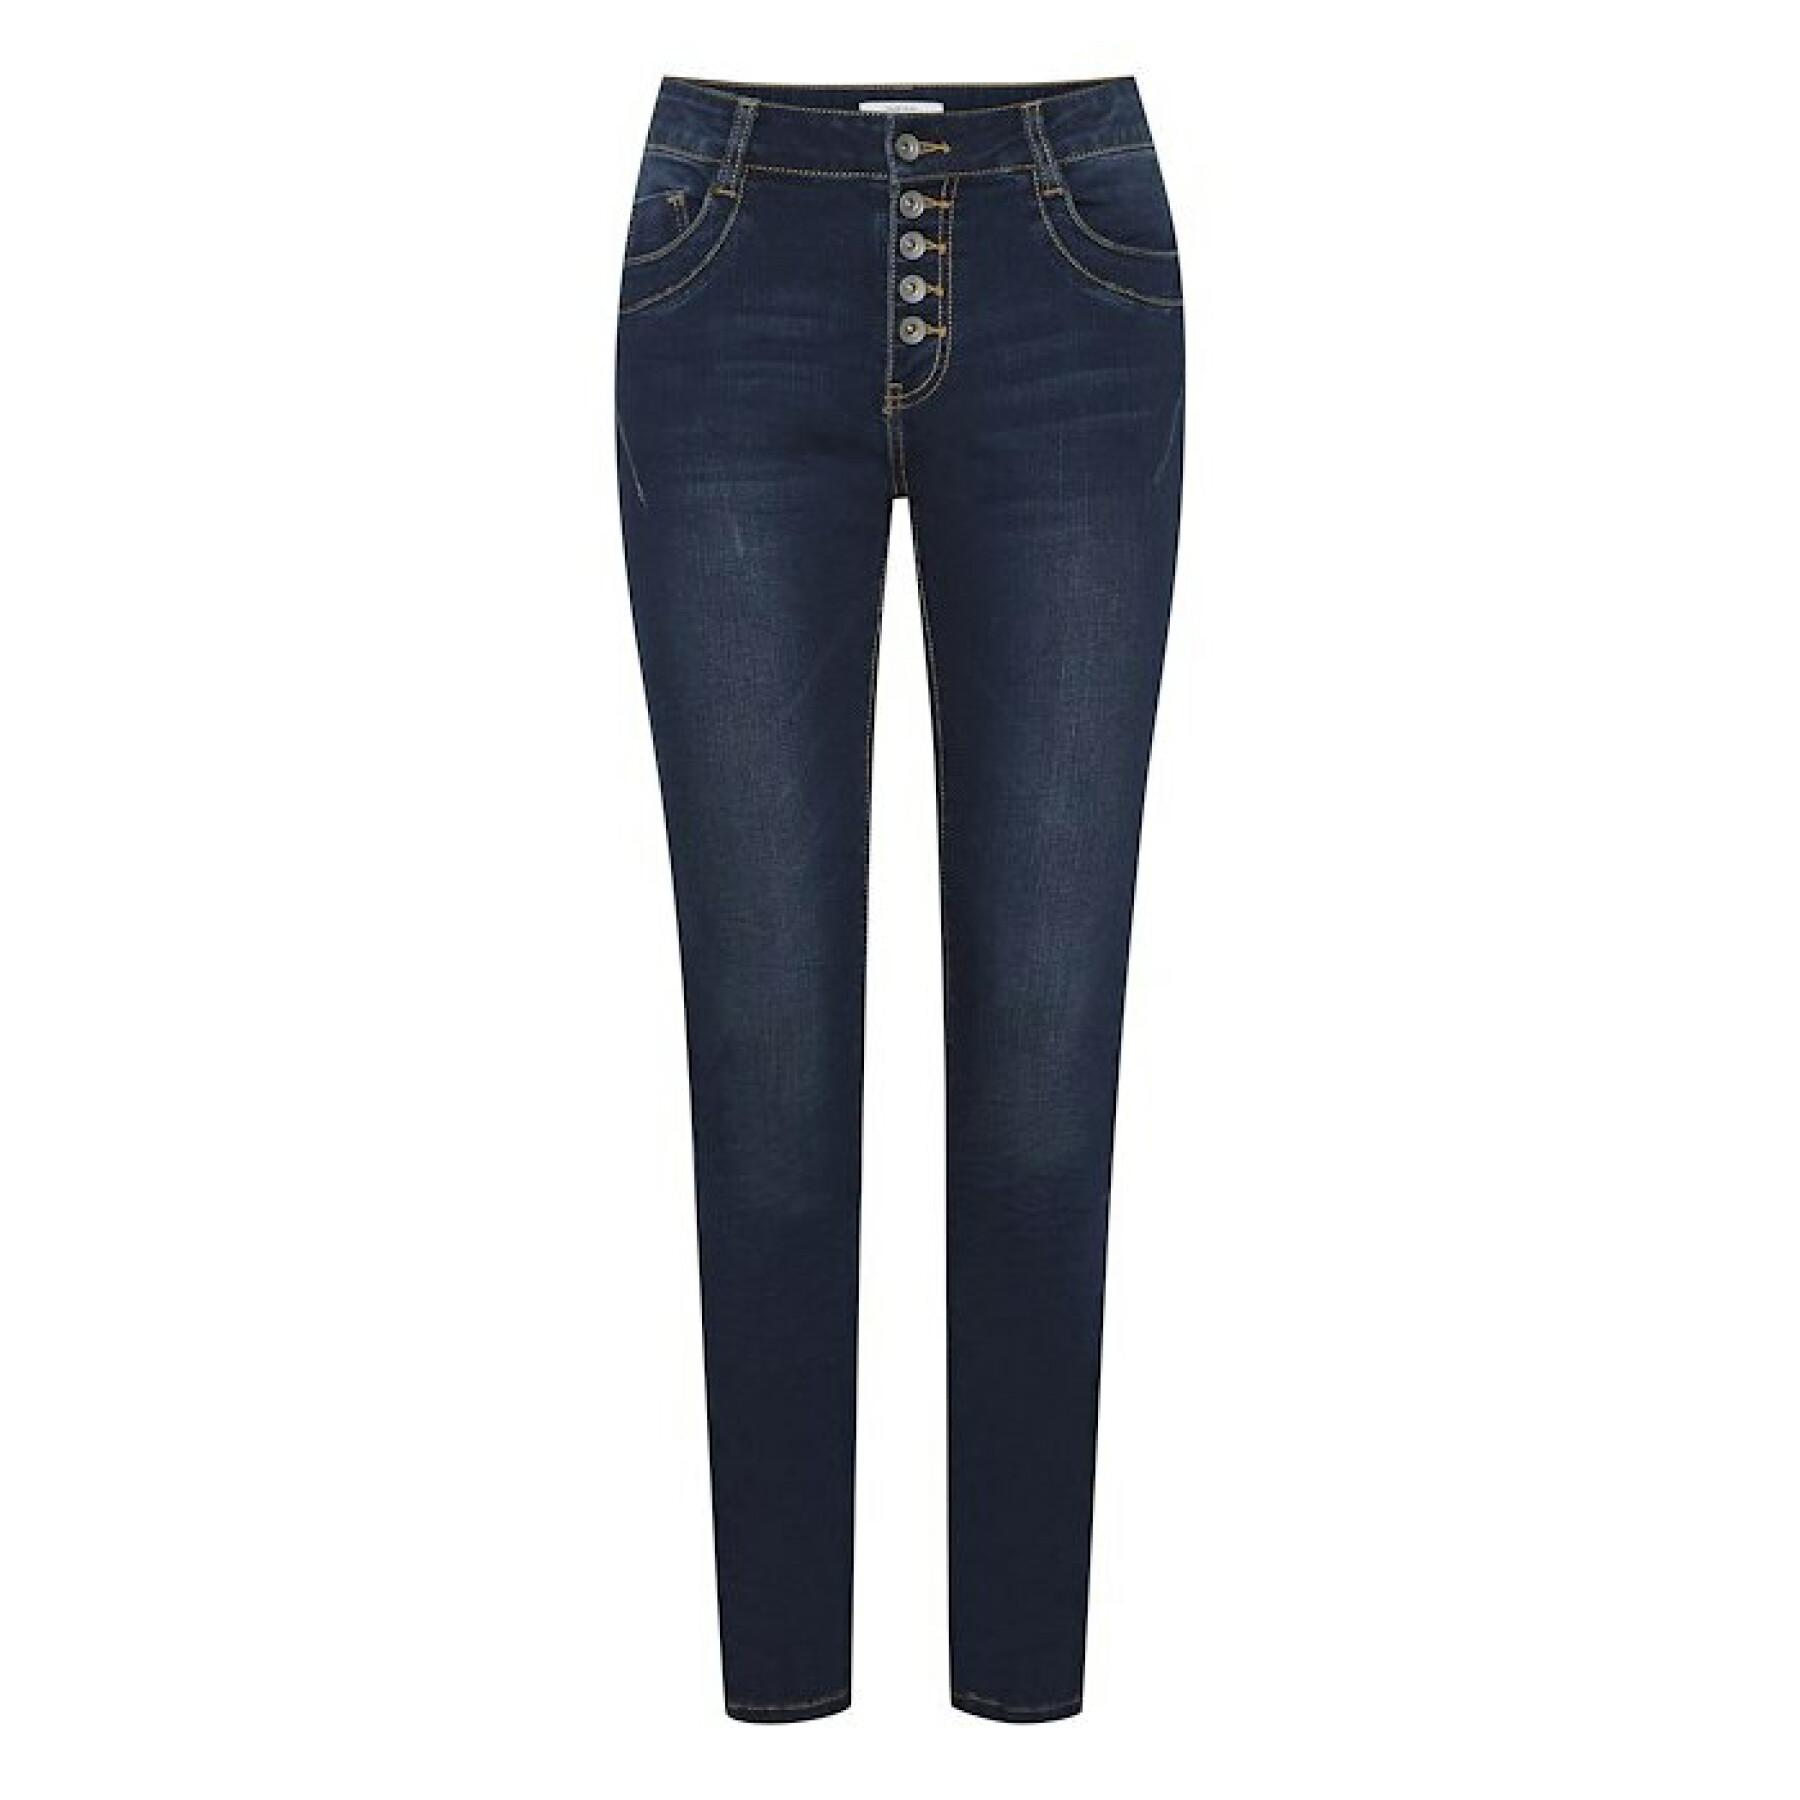 Jeans femme b.young bxkaily no